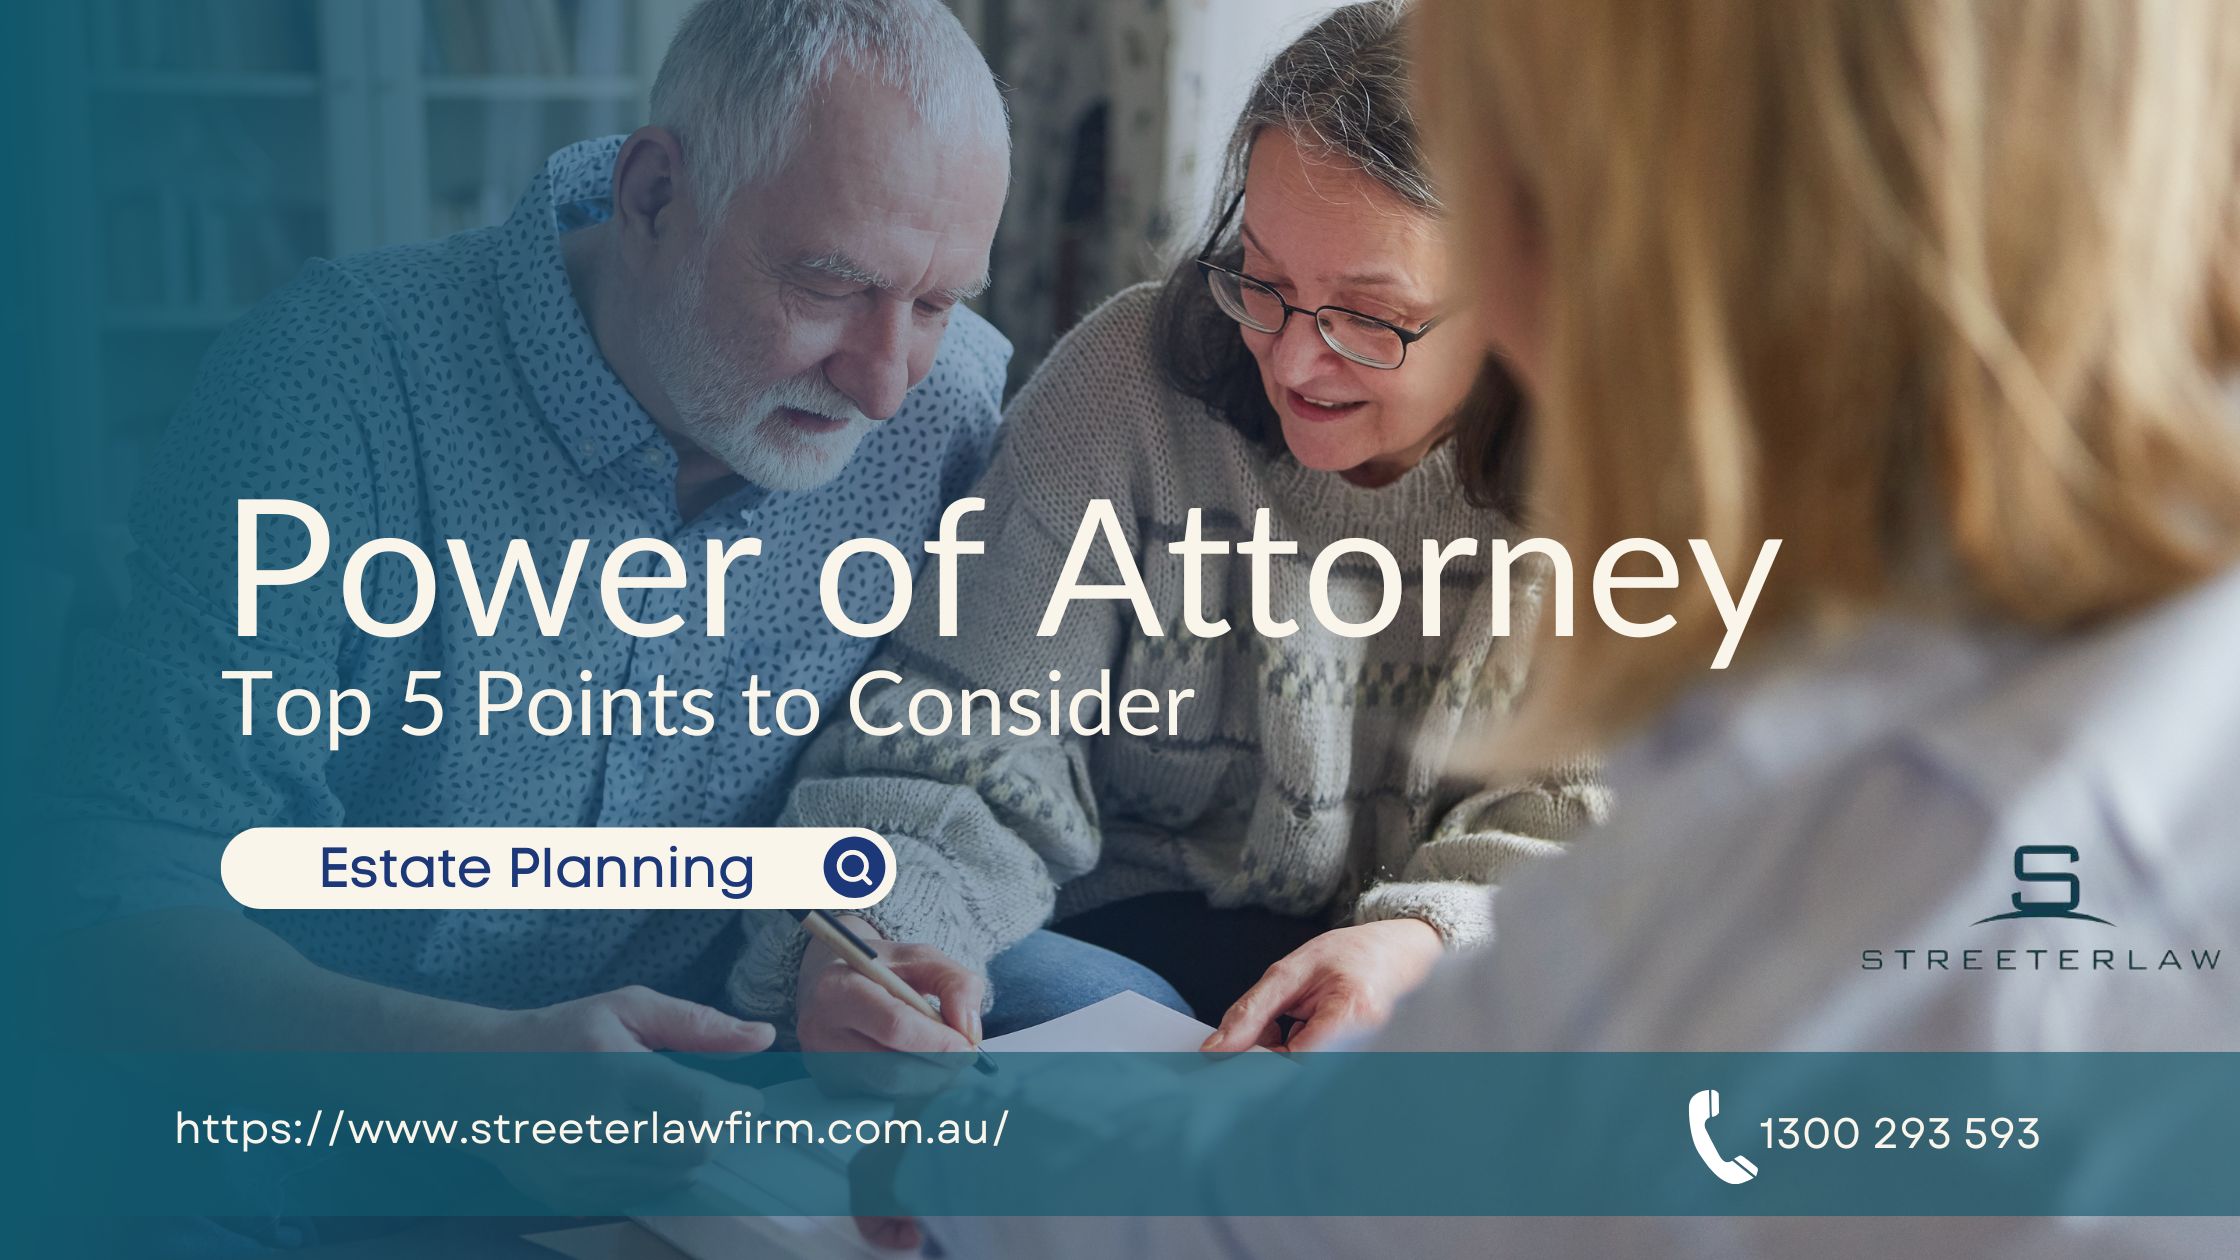 Power of Attorney - Top 5 Points to Consider